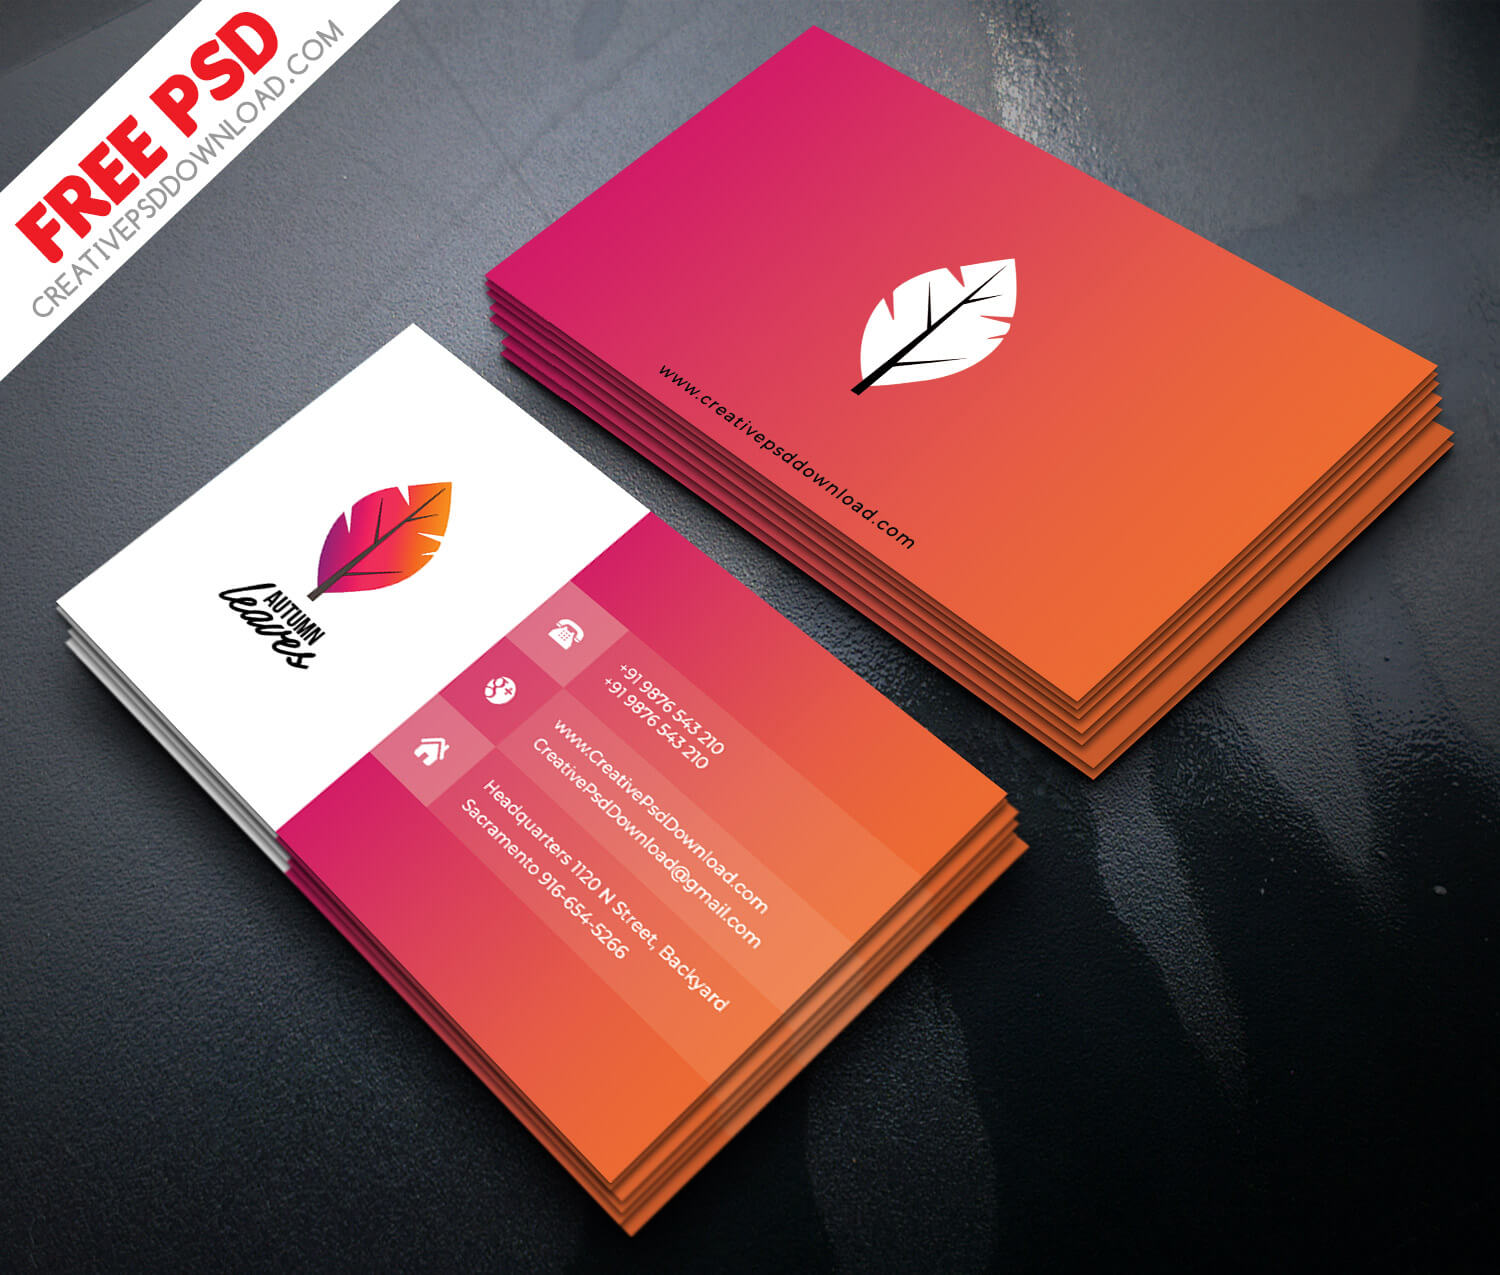 035-blank-business-card-template-psd-download-ideas-intended-for-blank-business-card-template